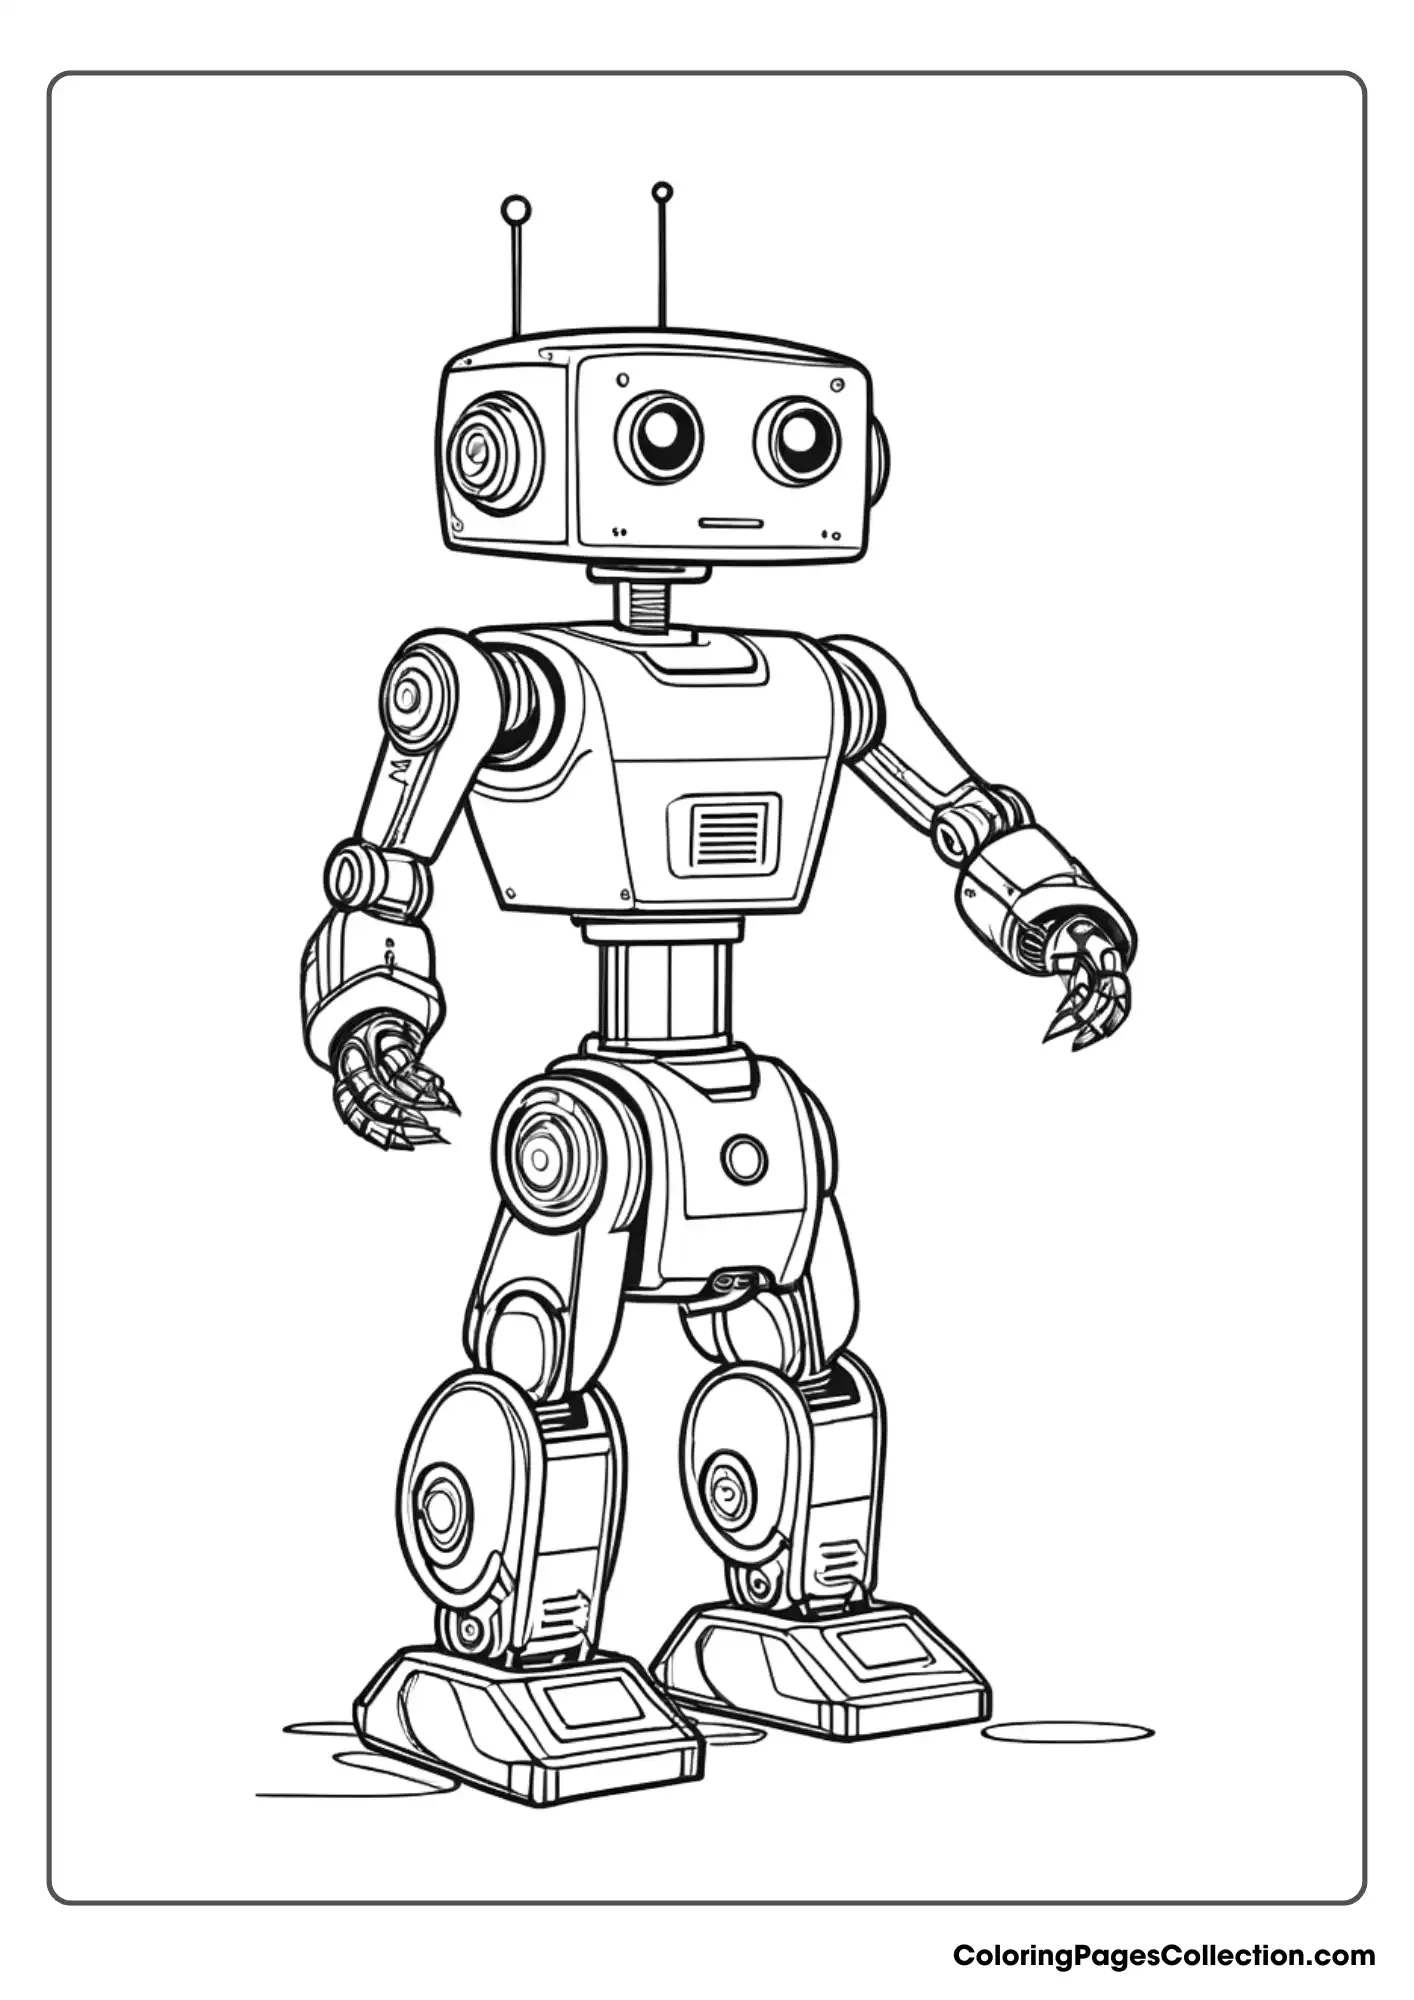 Coloring pages for teens, Robot Coloring Page